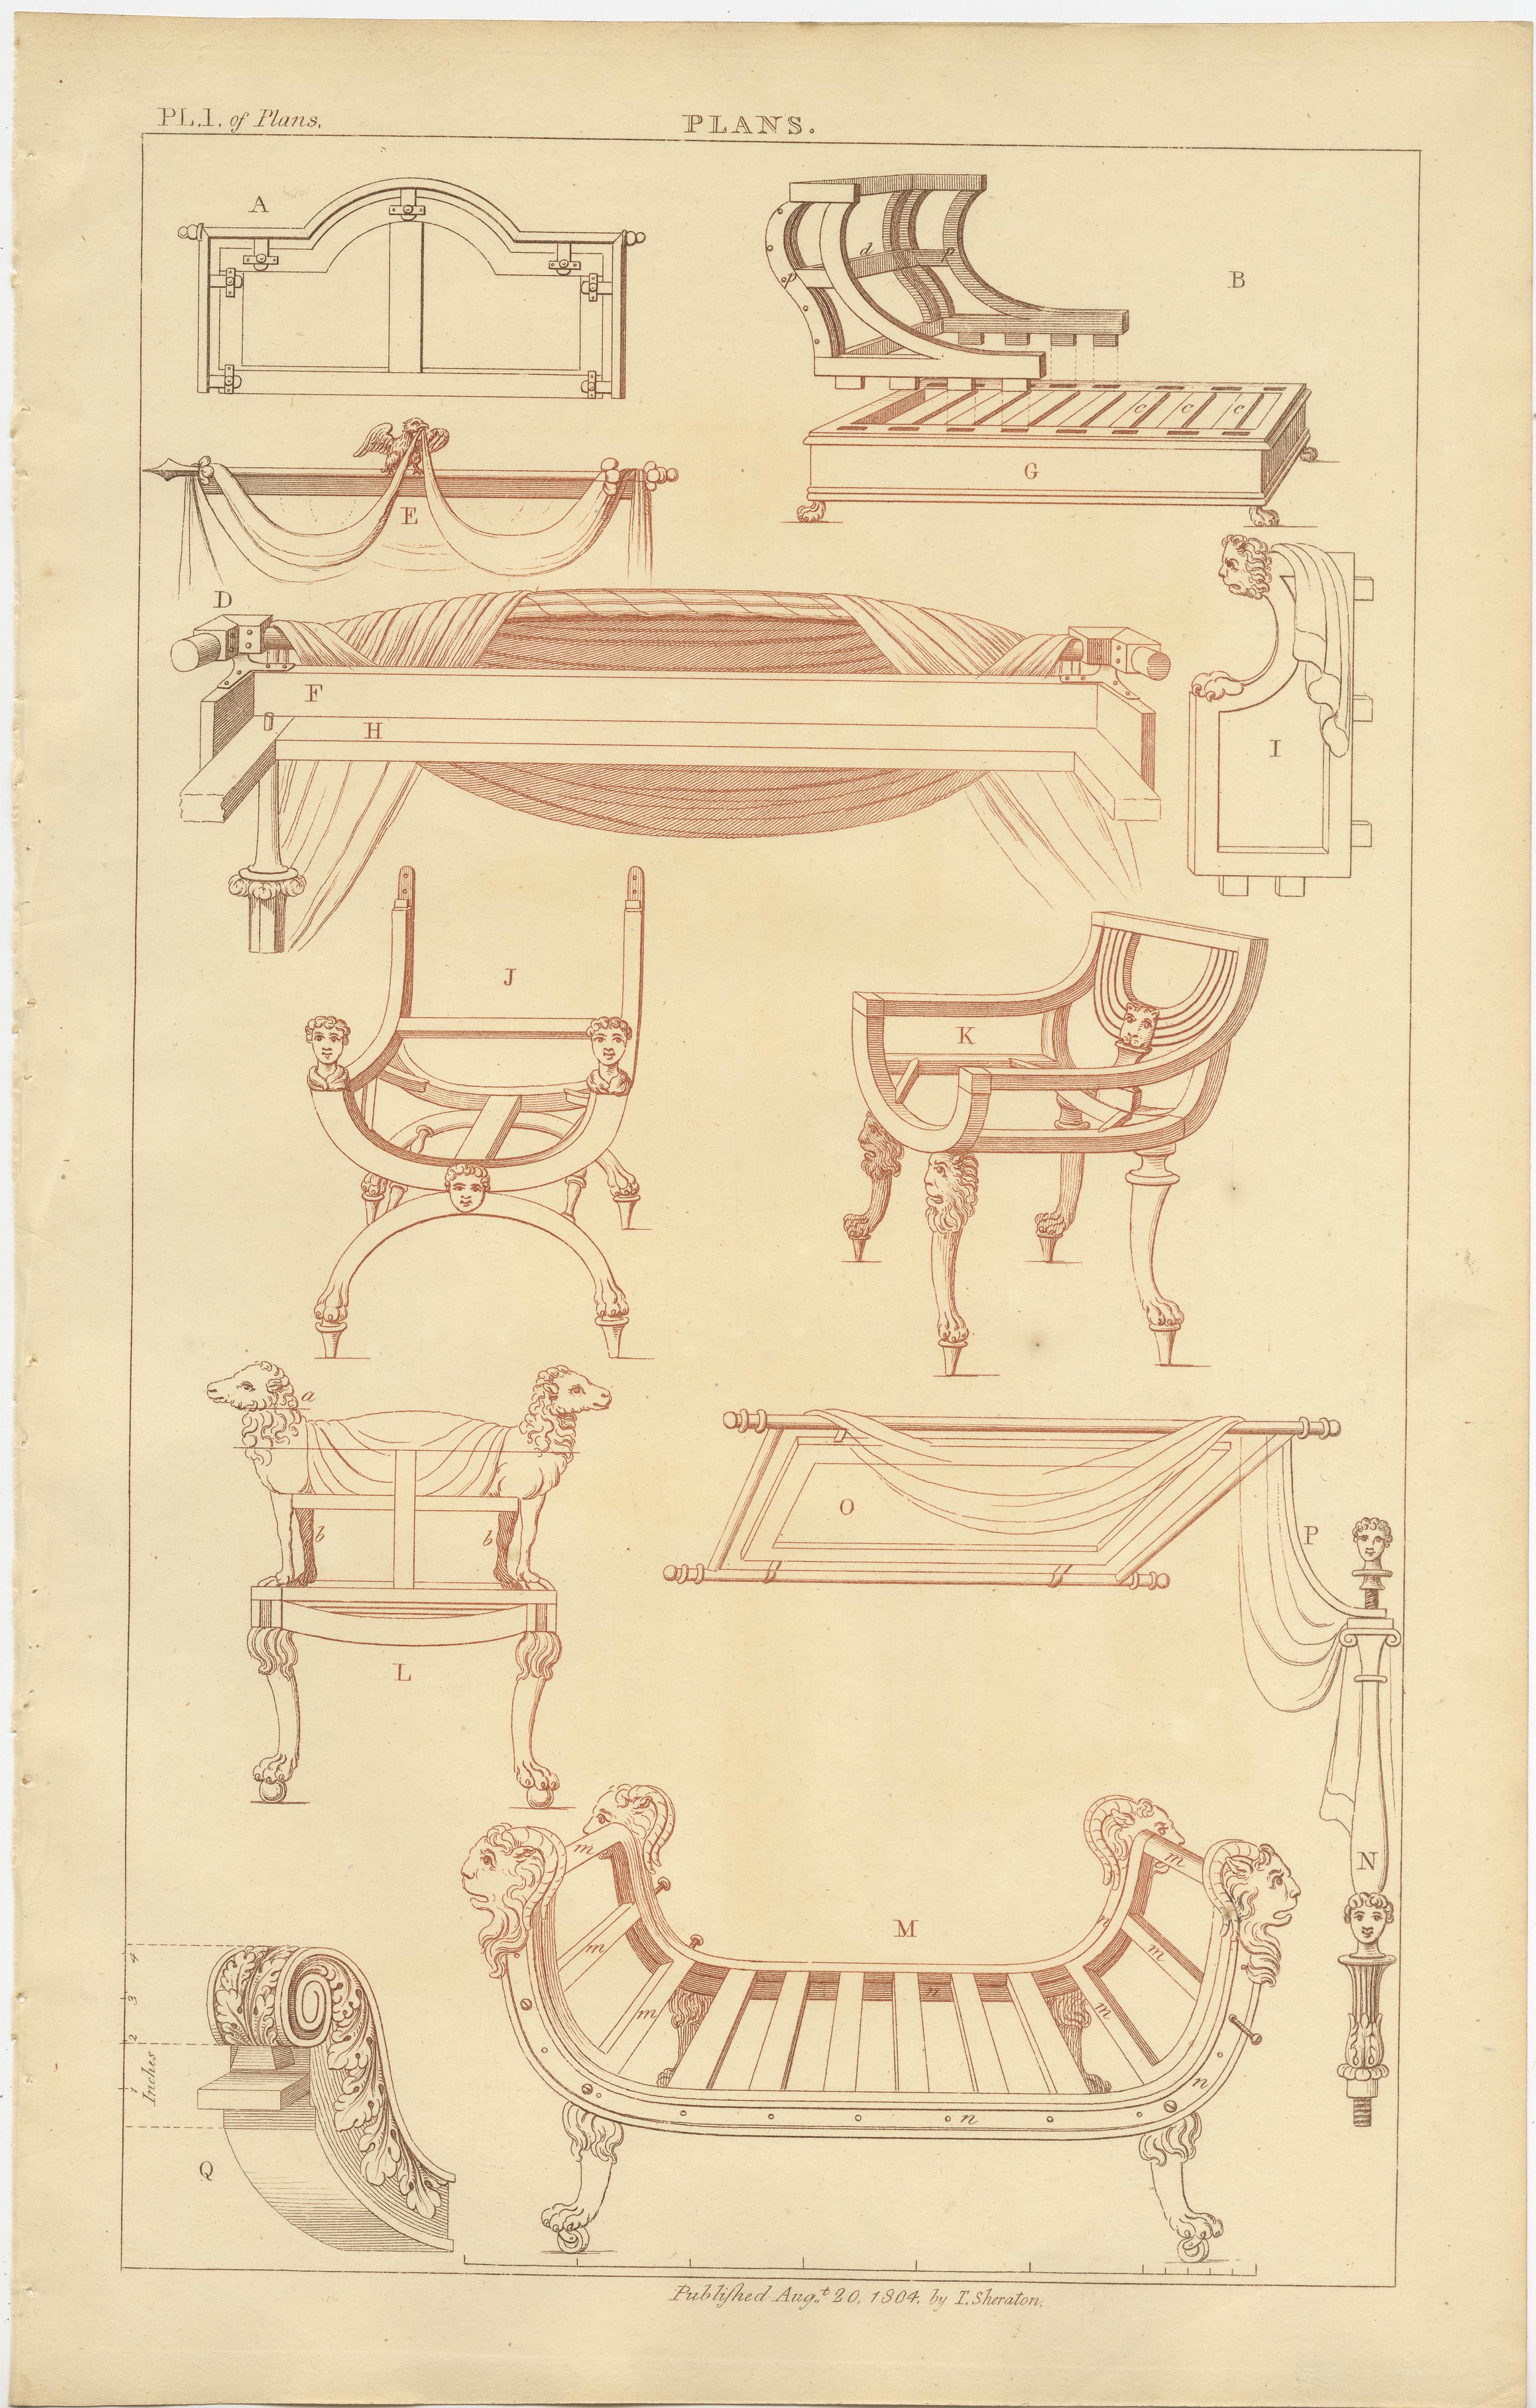 Set of two antique prints of furniture designs. These prints originate from 'The General Artist's Encyclopaedia' by Thomas Sheraton. Published 1803-1805.